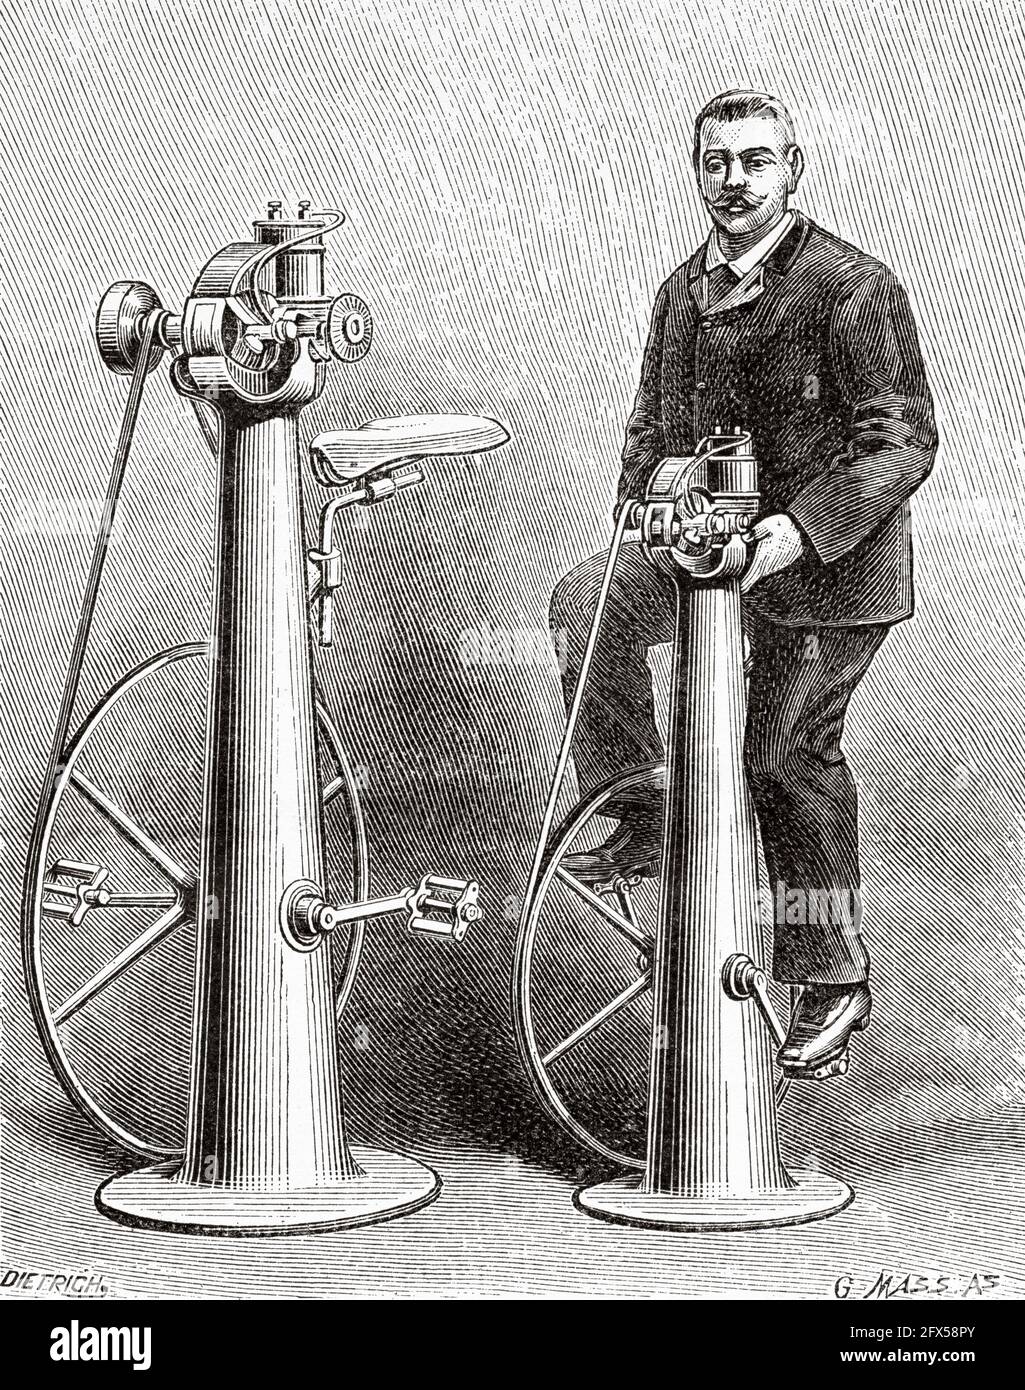 Old pedal dynamo from the late XIX century. Old 19th century engraved illustration from La Nature 1893 Stock Photo